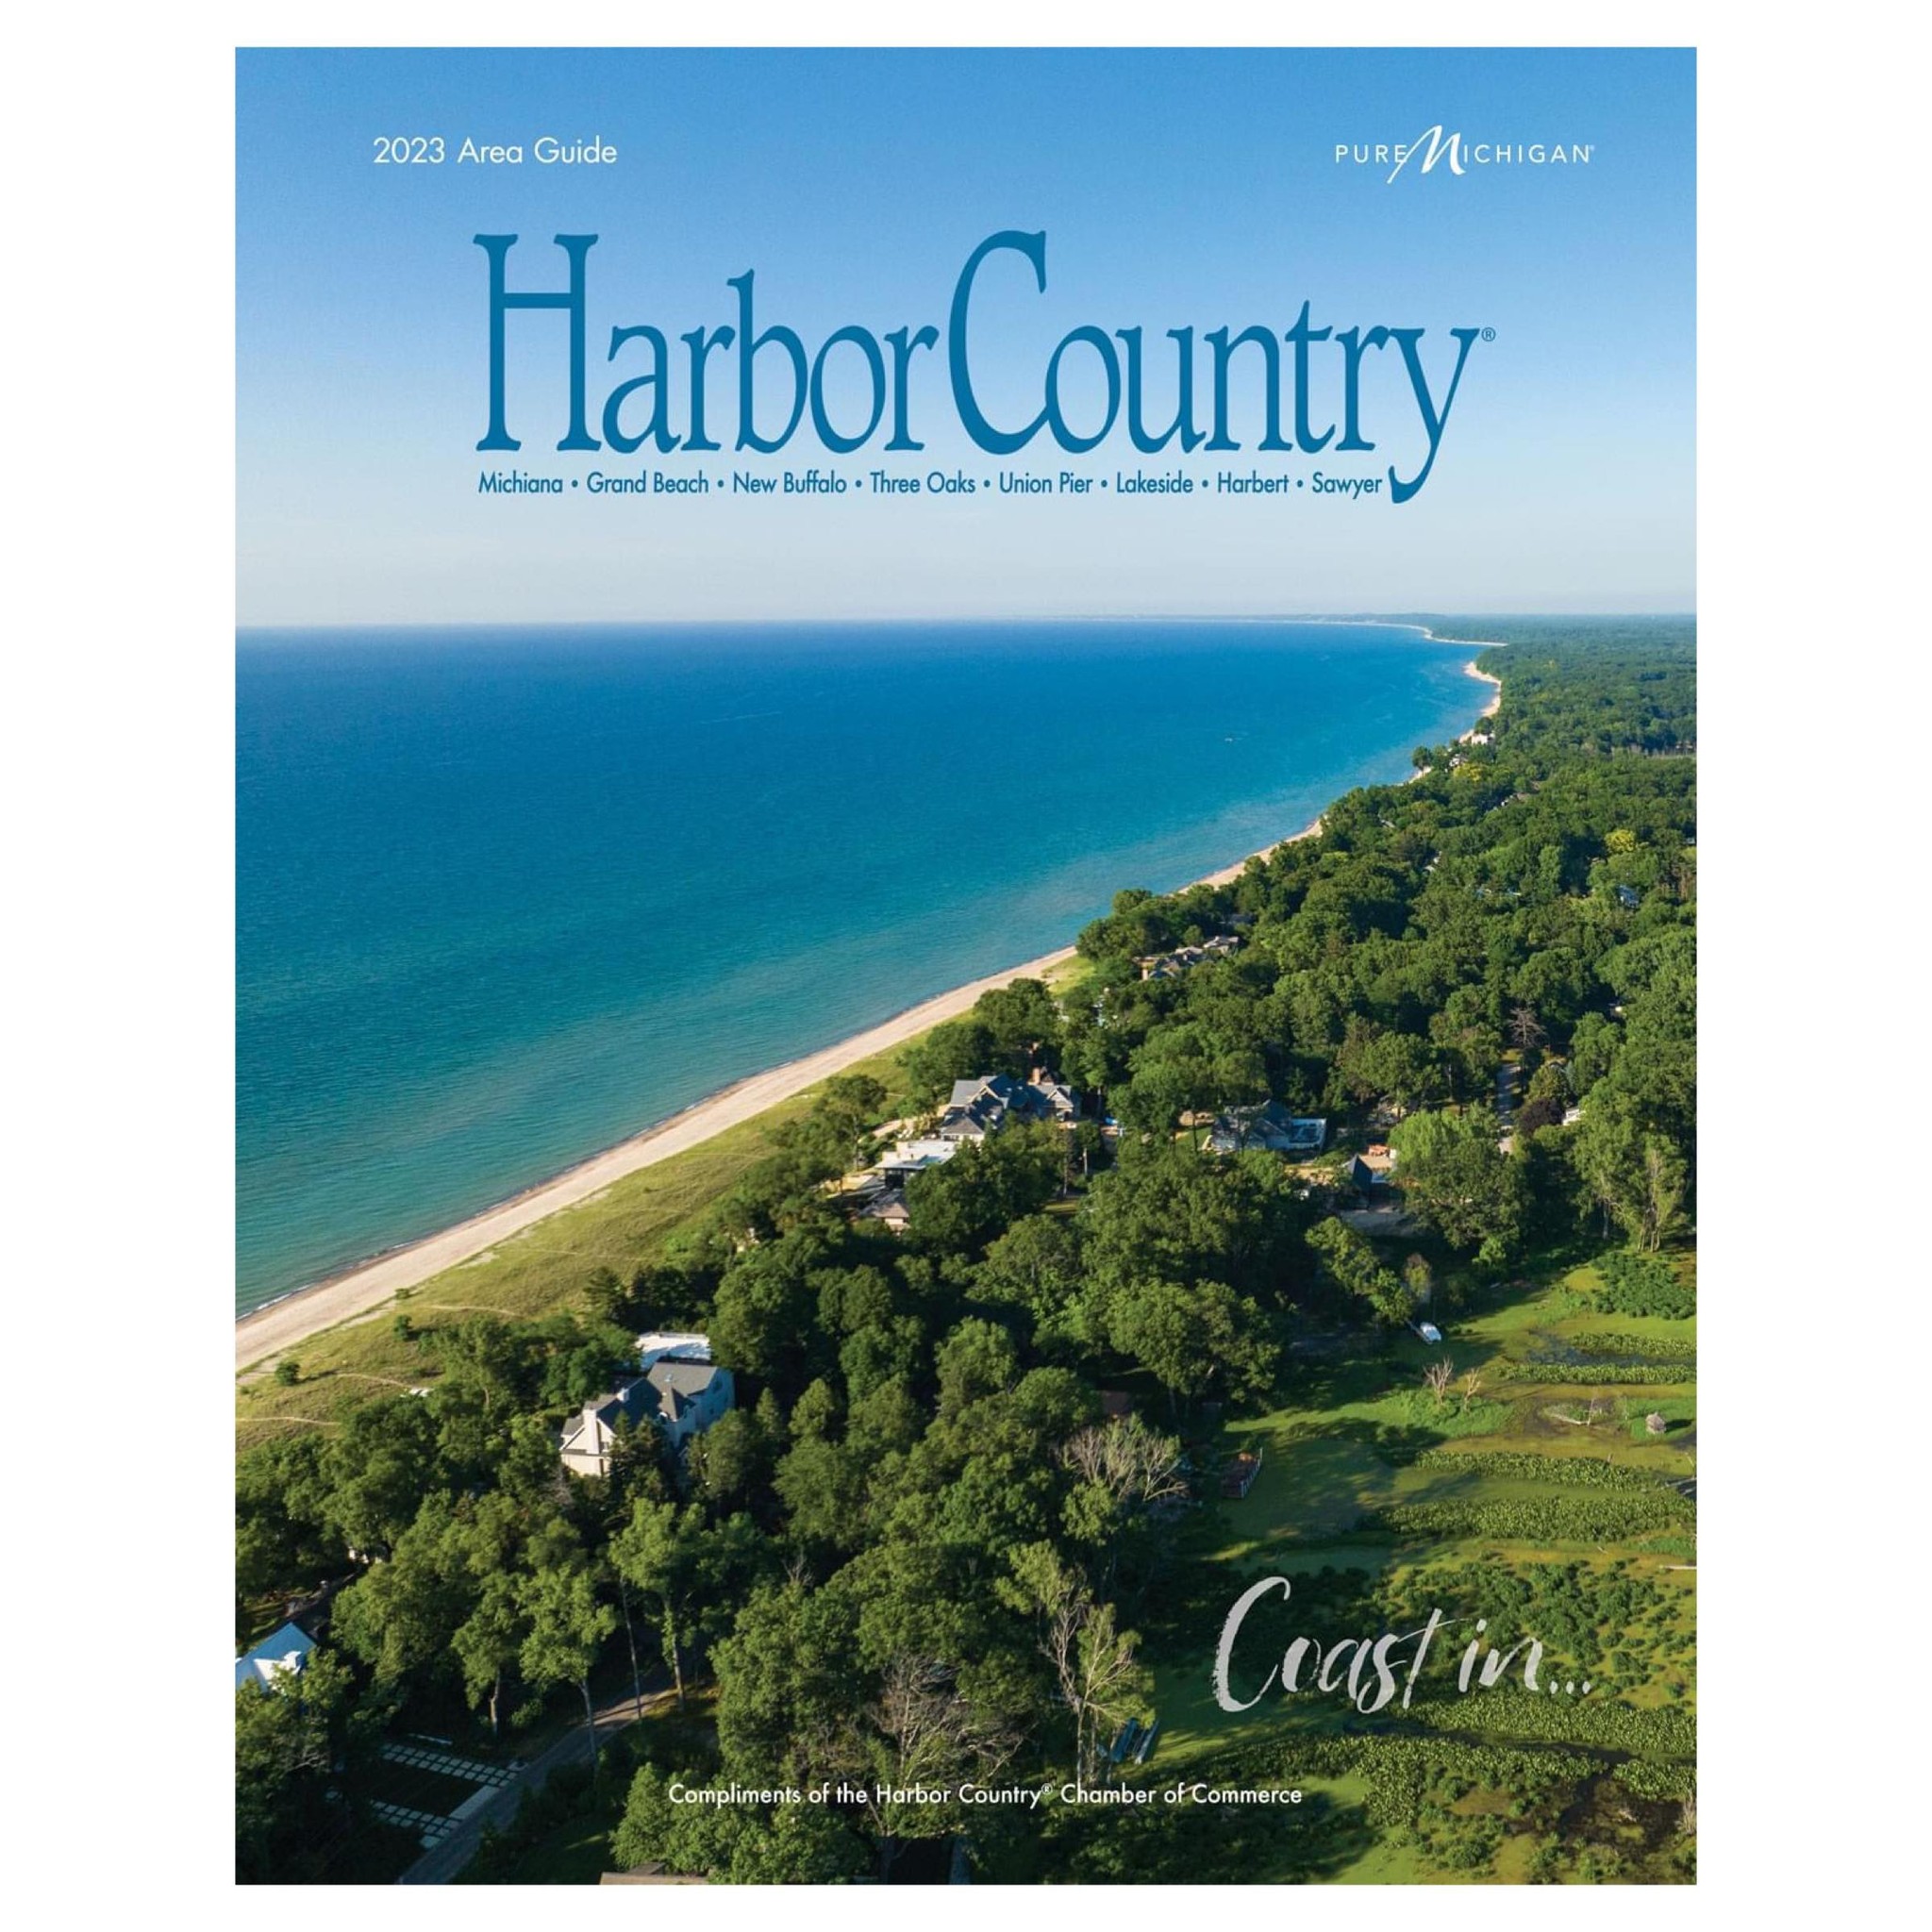 Unveiling Harbor Country: A Quick Overview